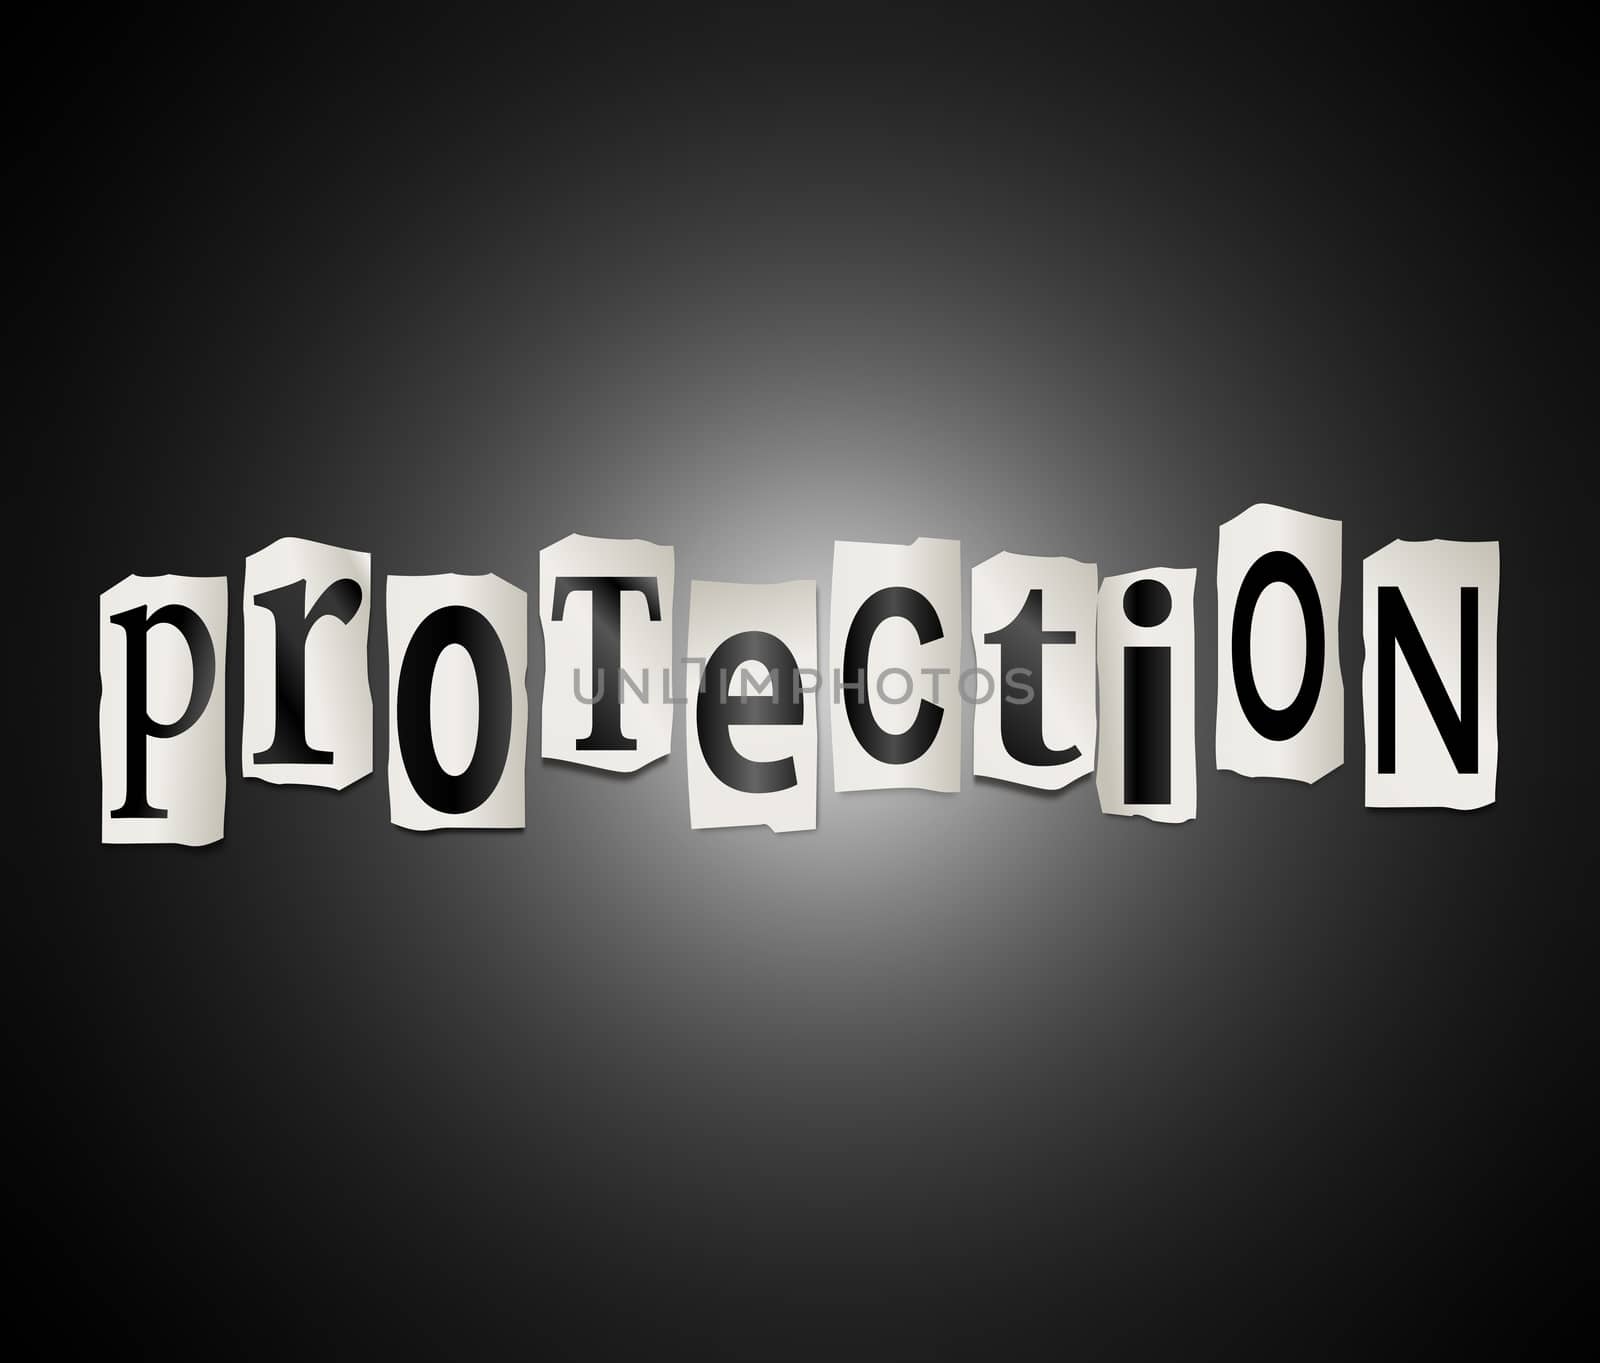 Illustration depicting a set of cut out printed letters arranged to form the word protection.